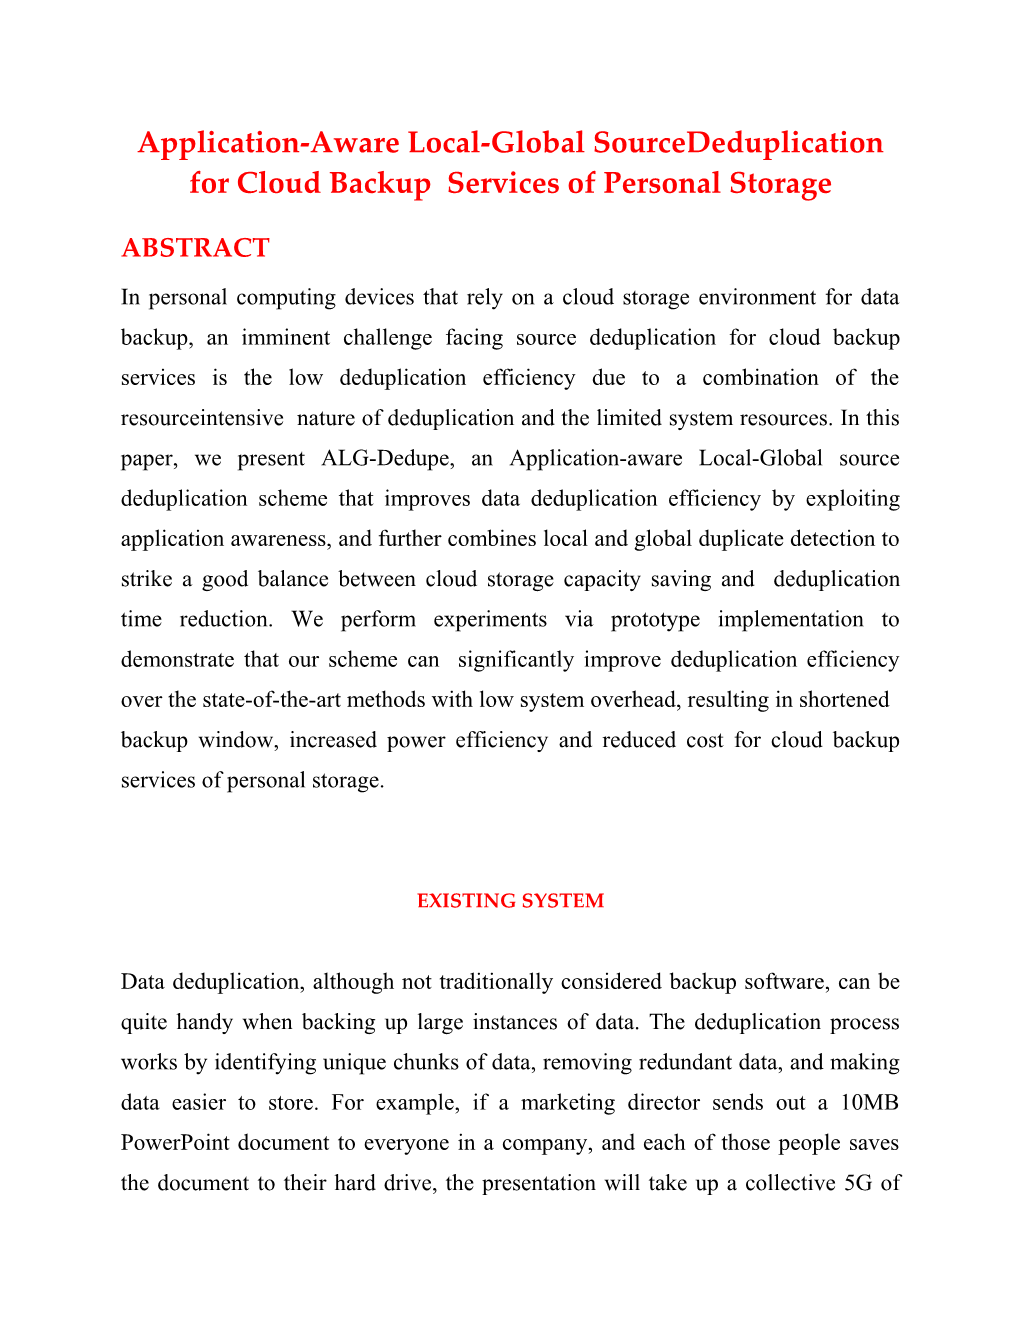 Application-Aware Local-Global Sourcededuplication for Cloud Backup Services of Personal